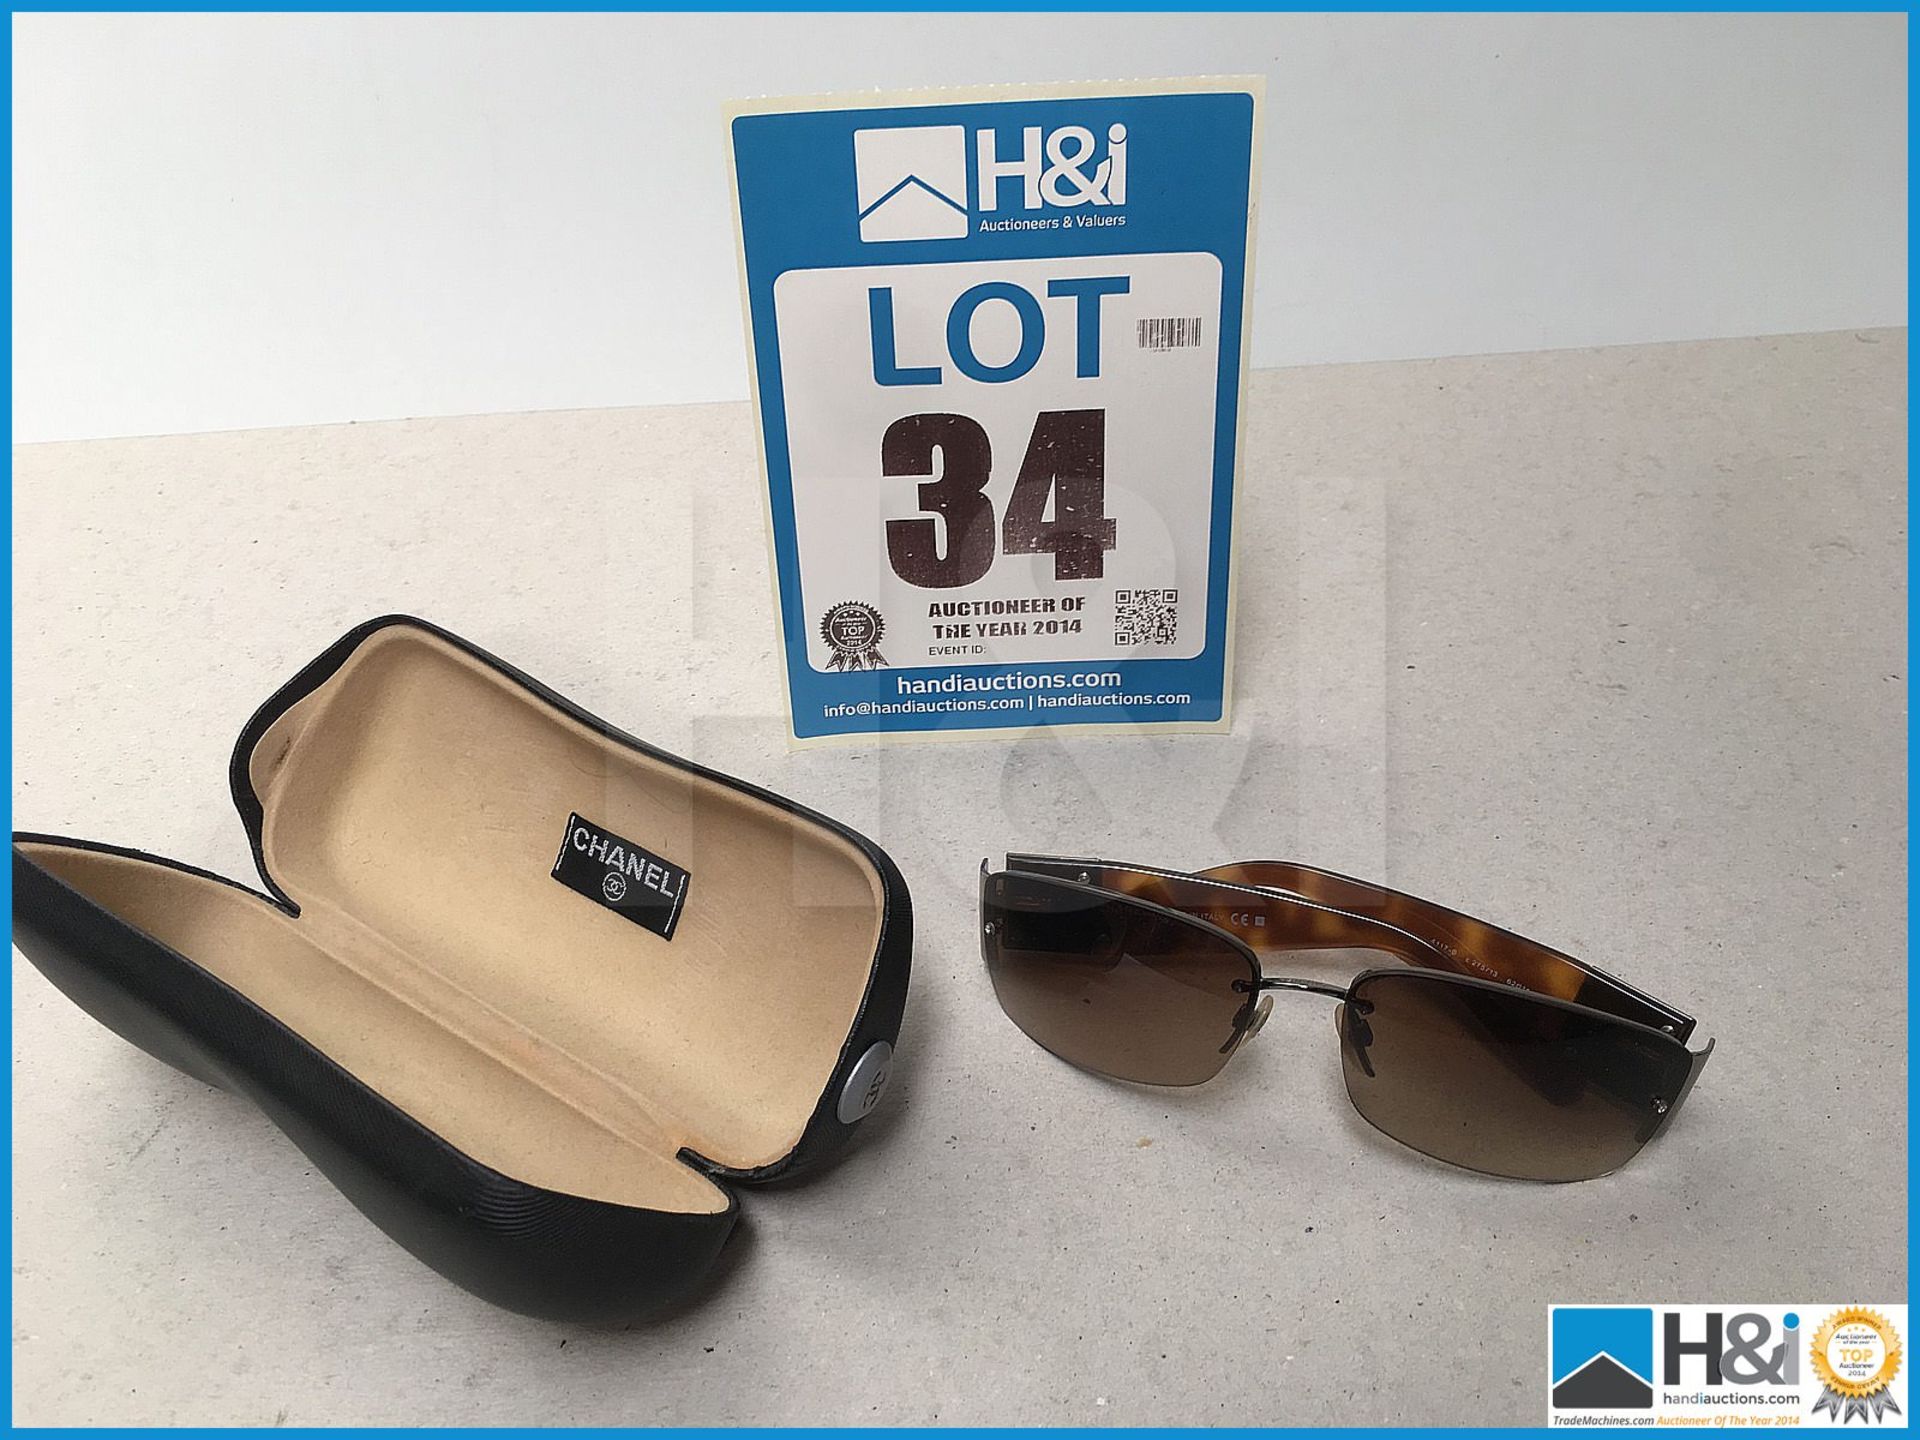 Pair of original Chanel ladies sunglasses with case in excellent condition.